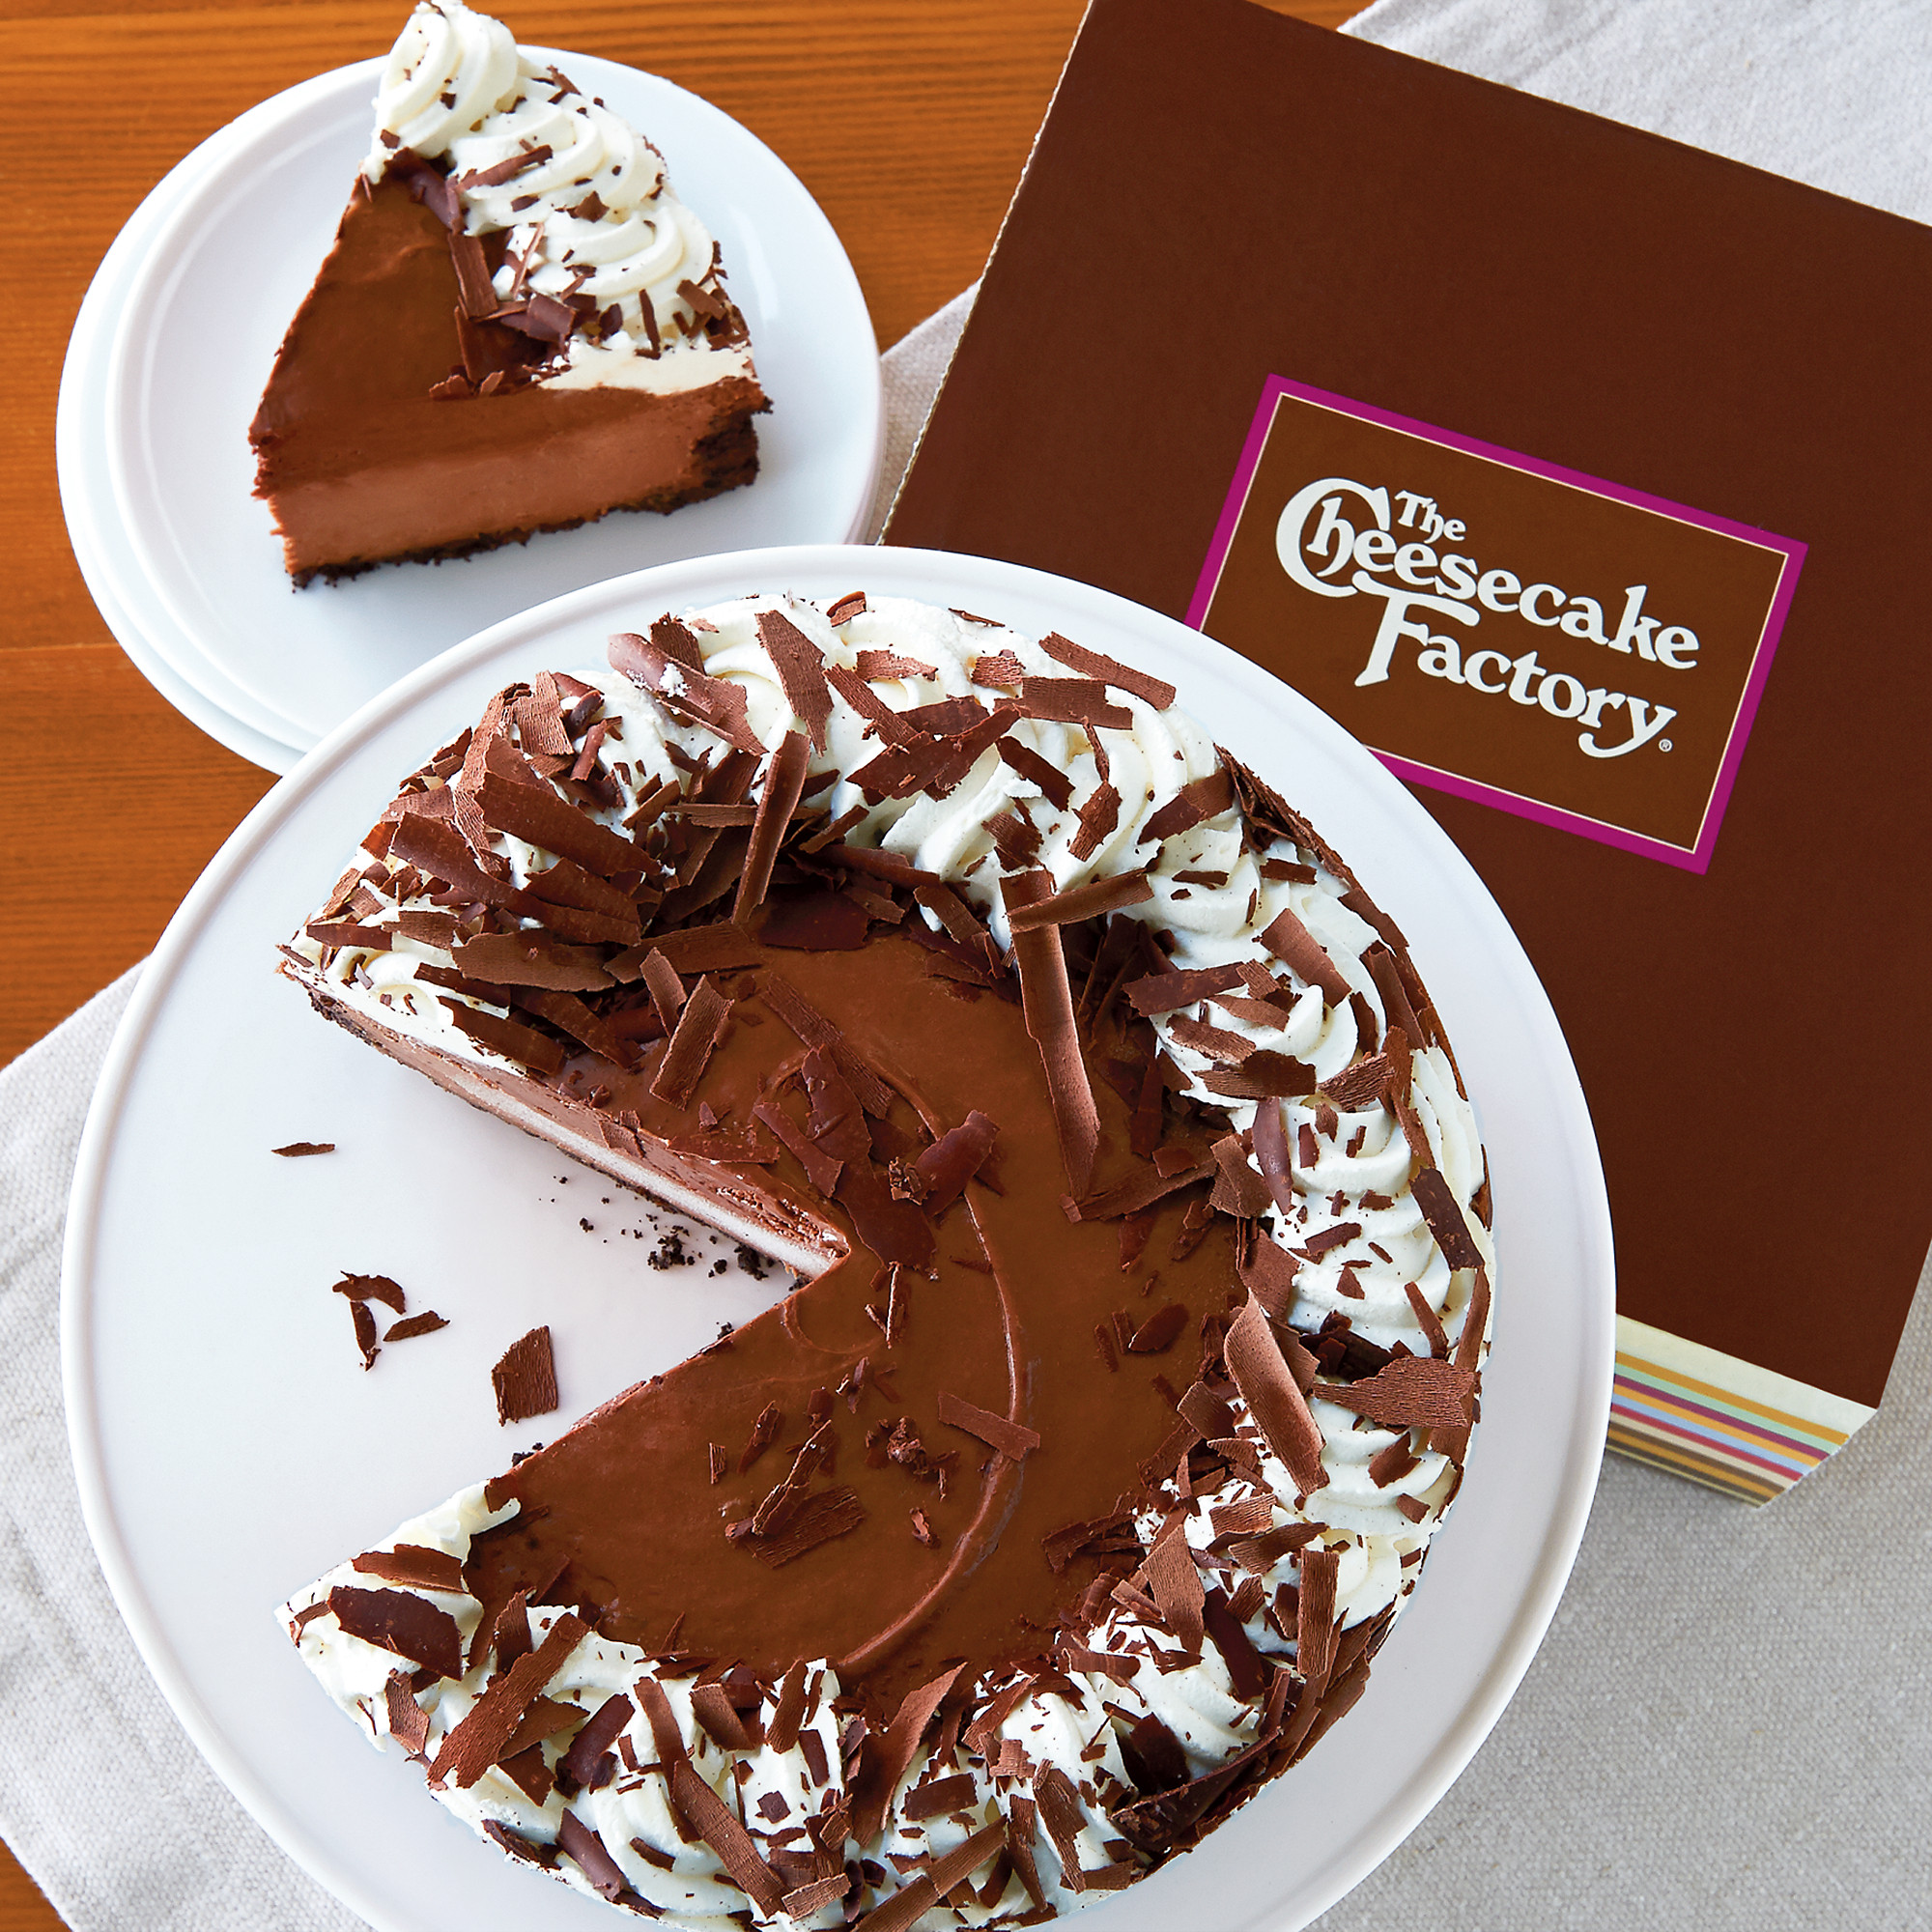 Chocolate Mousse Cheesecake Factory
 The Cheesecake Factory Chocolate Mousse Cheesecake